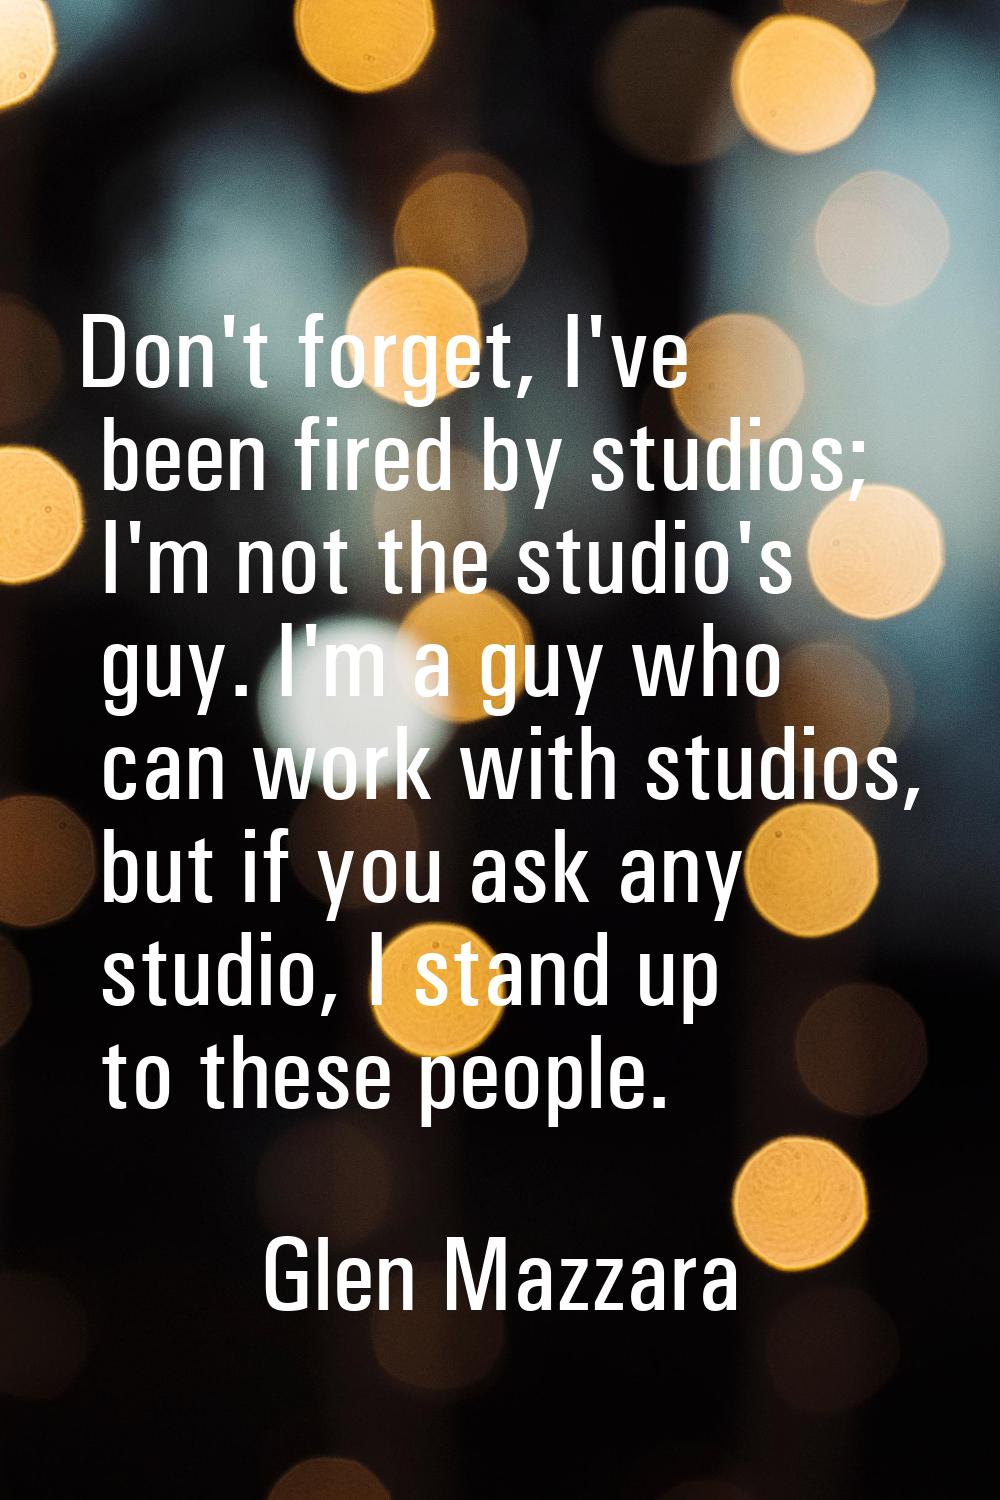 Don't forget, I've been fired by studios; I'm not the studio's guy. I'm a guy who can work with stu